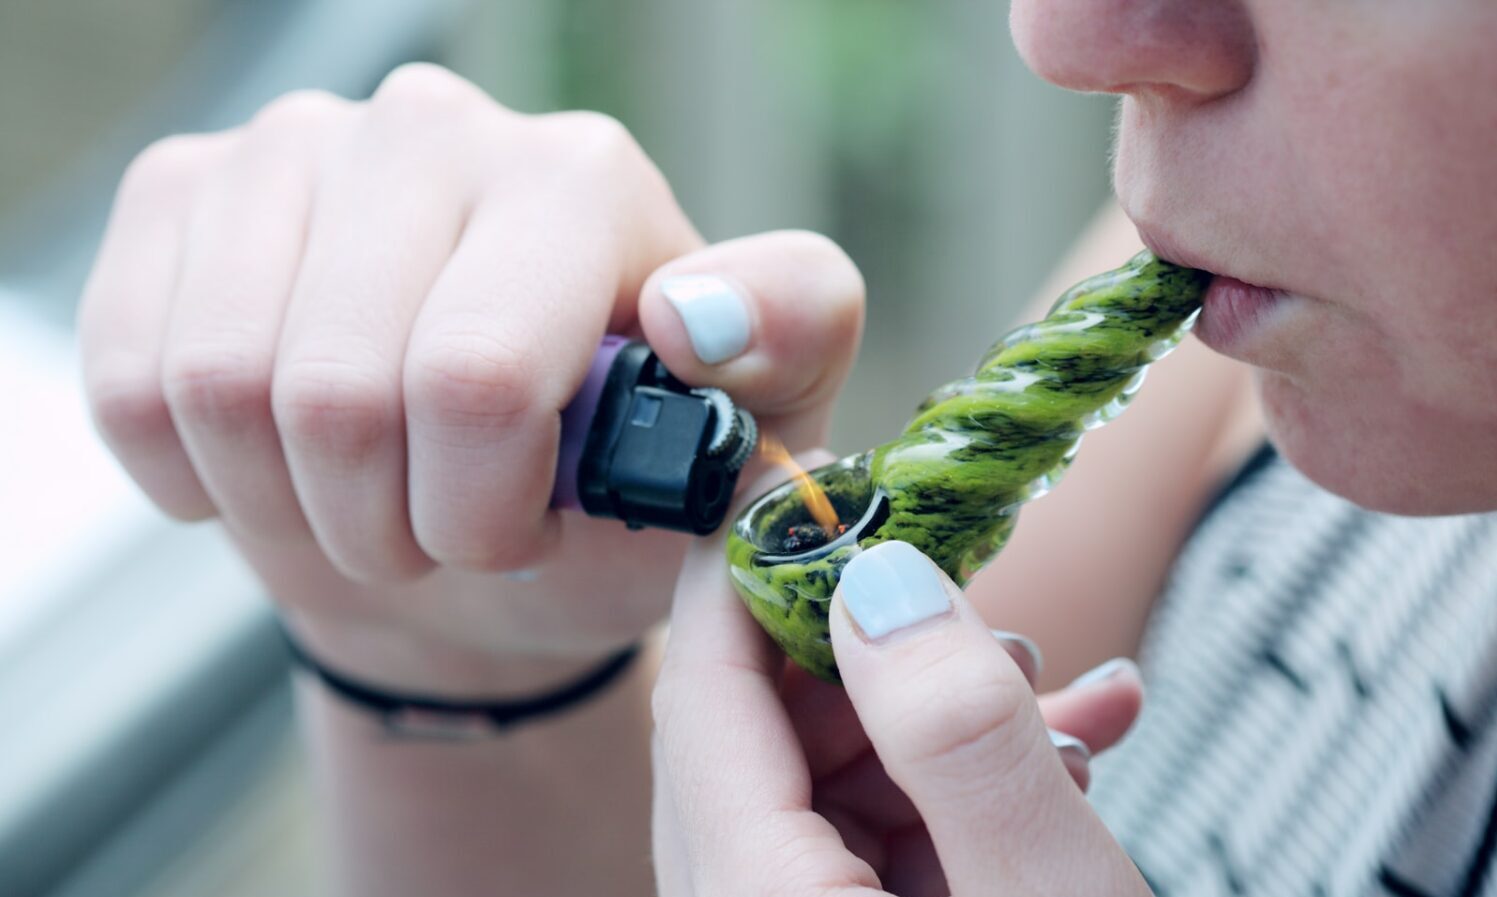 Teens Are Getting Sick From High THC Marijuana Products